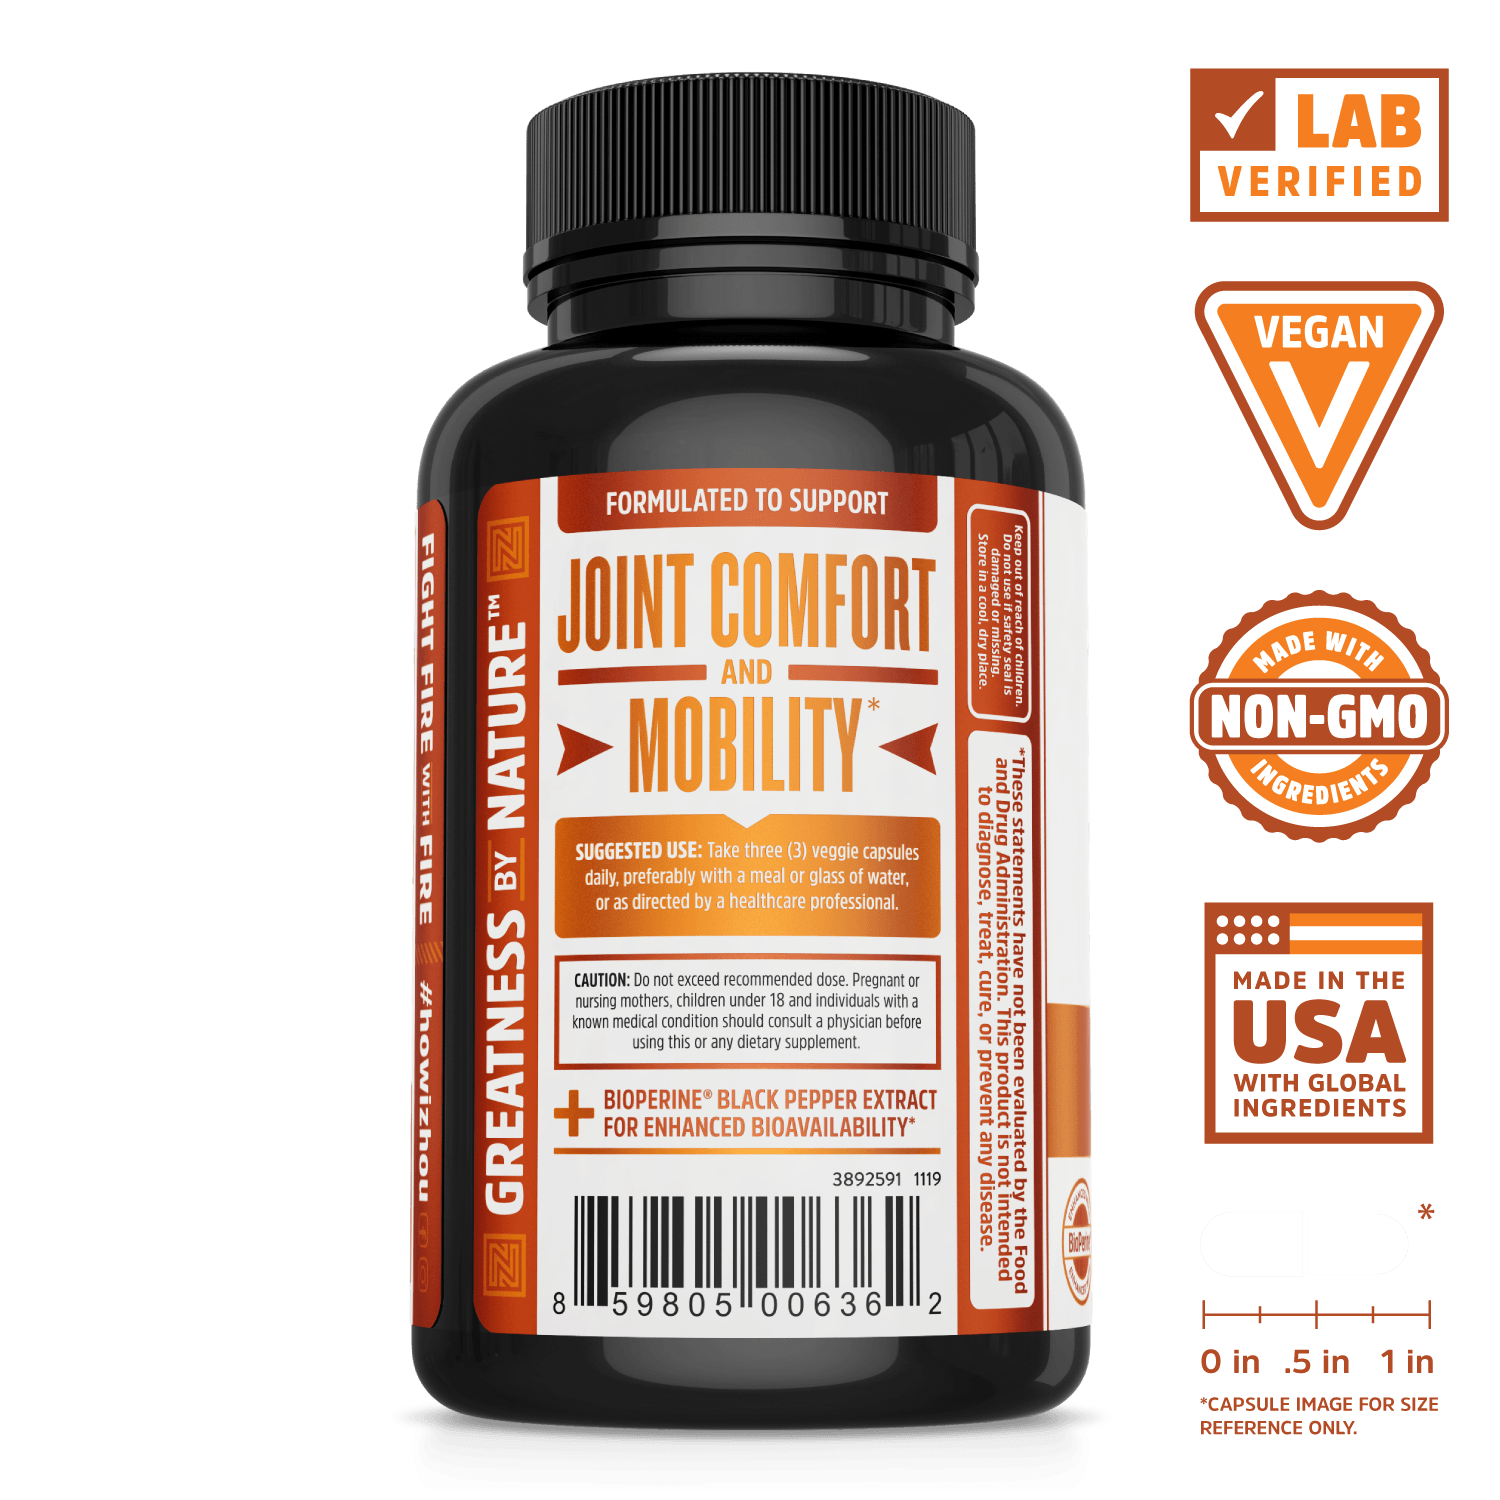 Zhou Nutrition Turmeric Curcumin with 95% Standardized Curcuminoids. Bottle side. Lab verified, vegan, made with non-GMO ingredients, made in the USA with global ingredients.